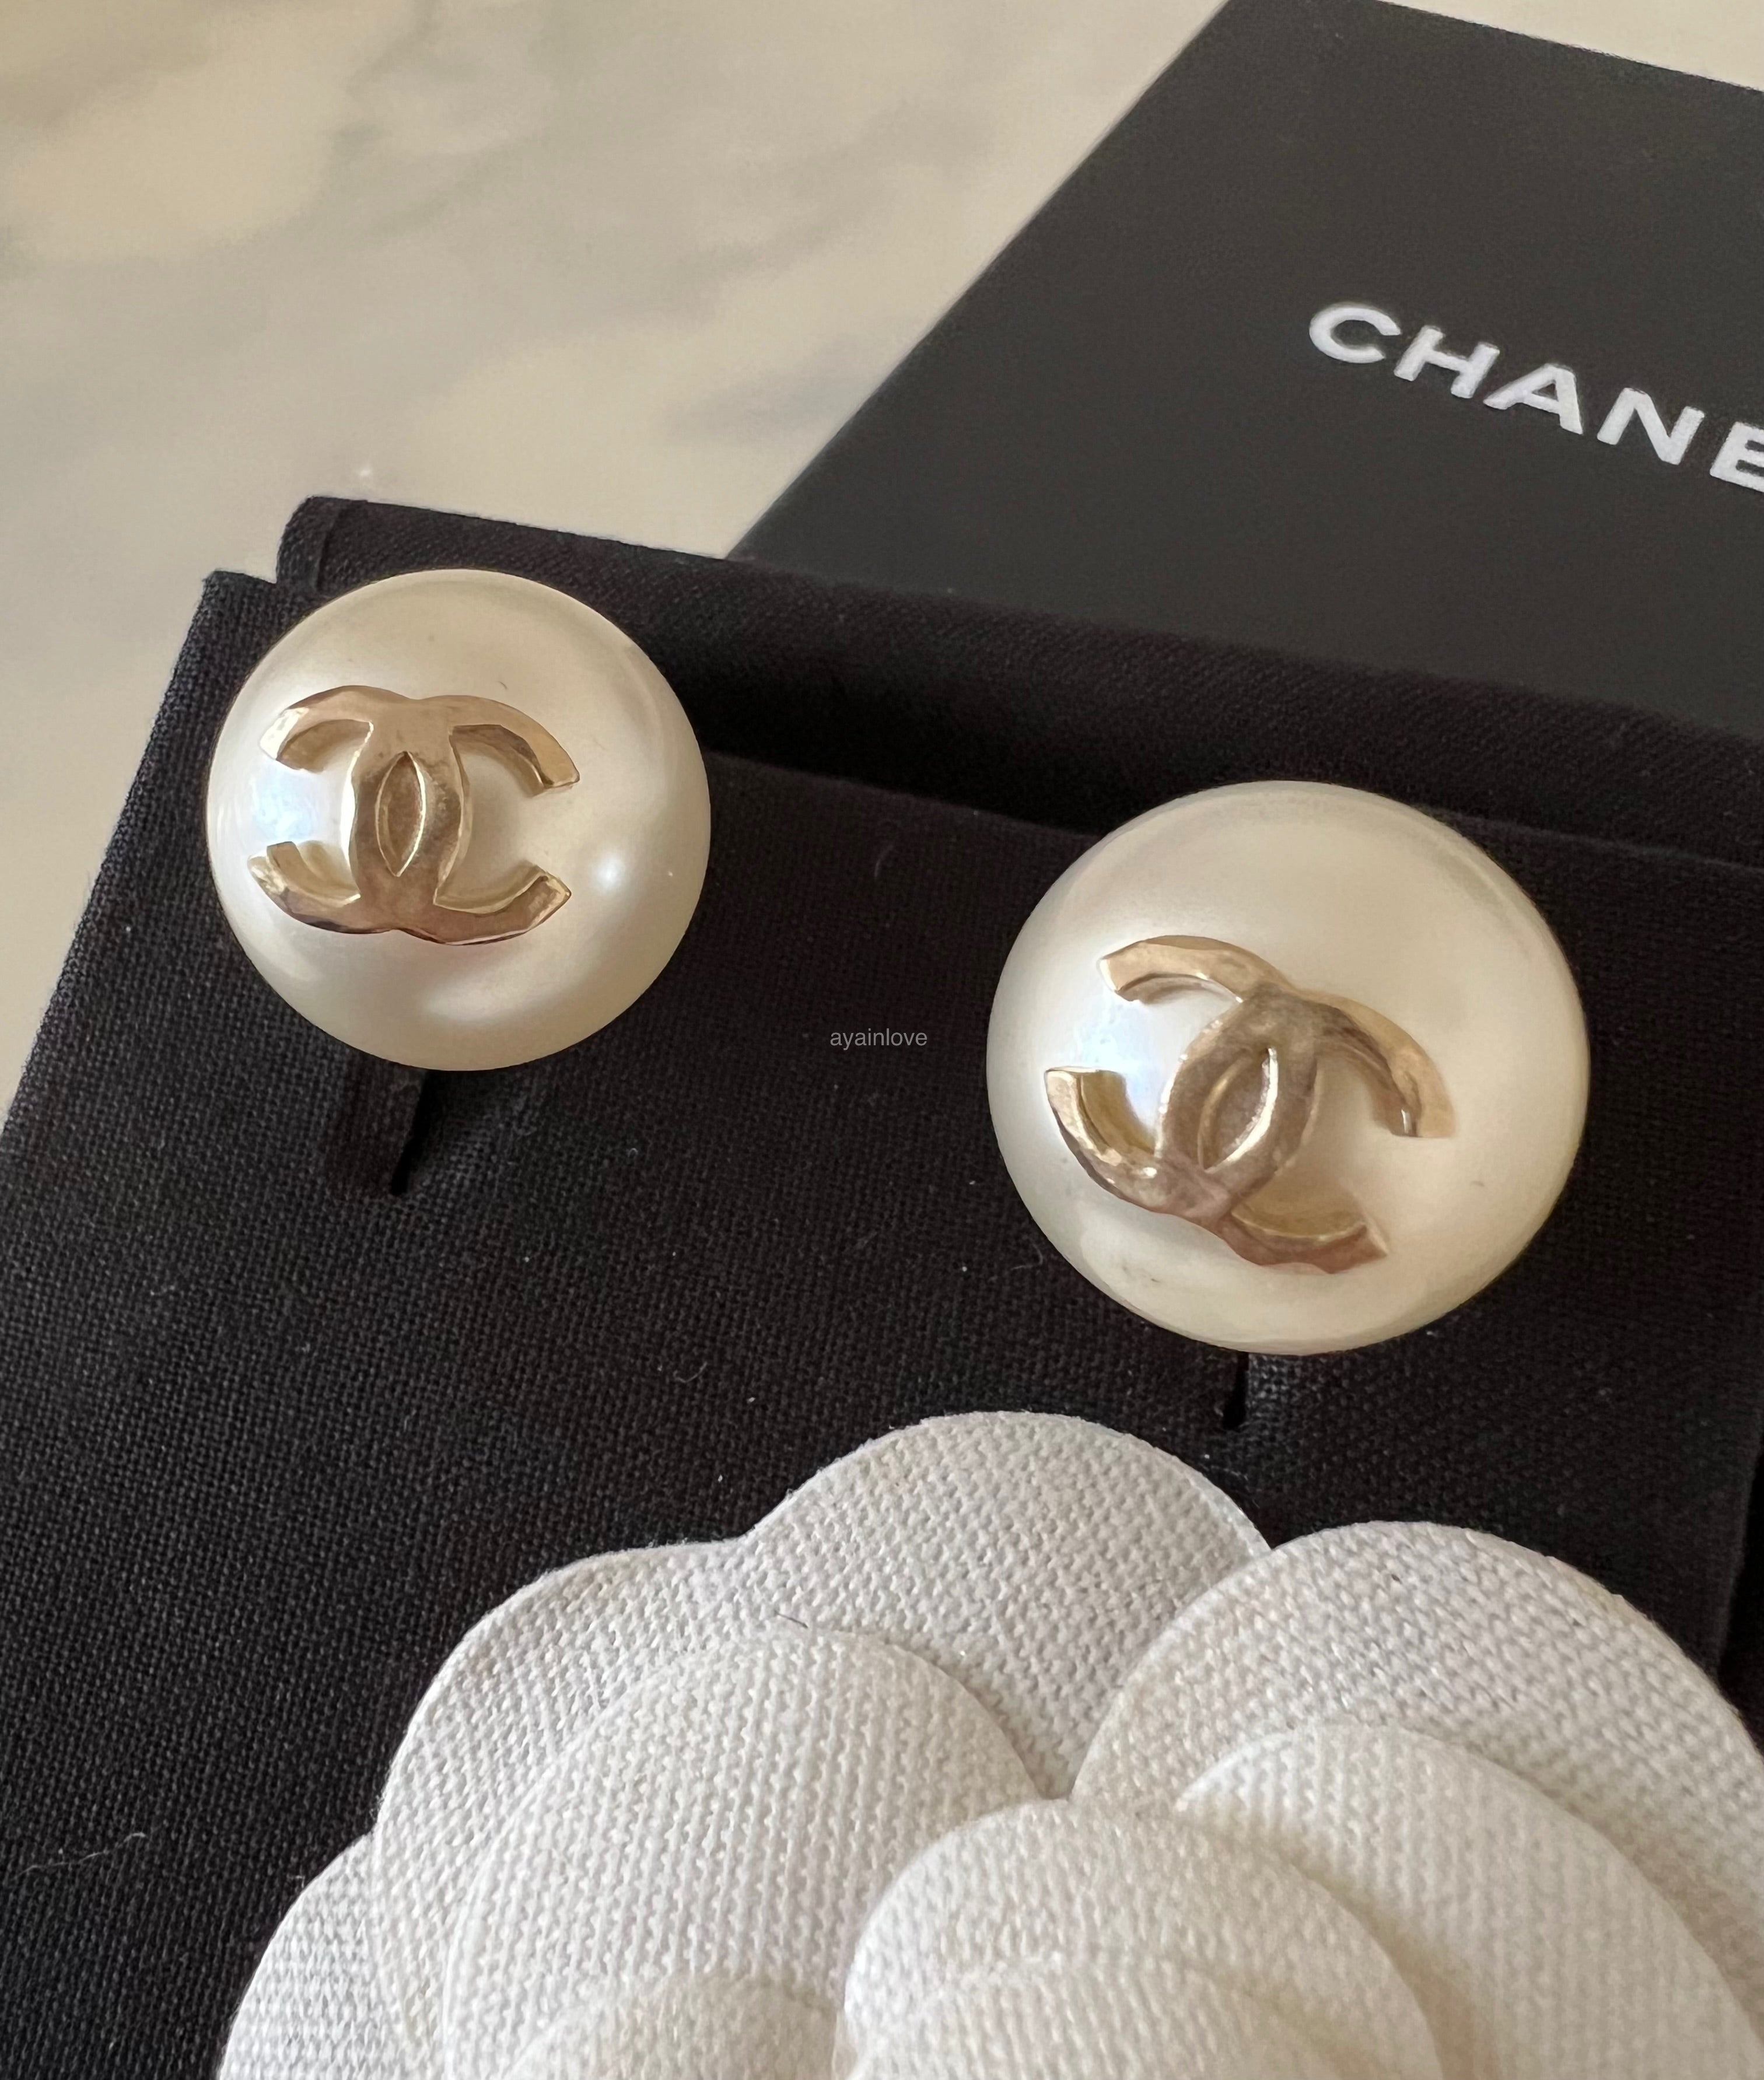 Chanel Round Crystal/Pearl Stud Earrings A20 B - Touched Vintage